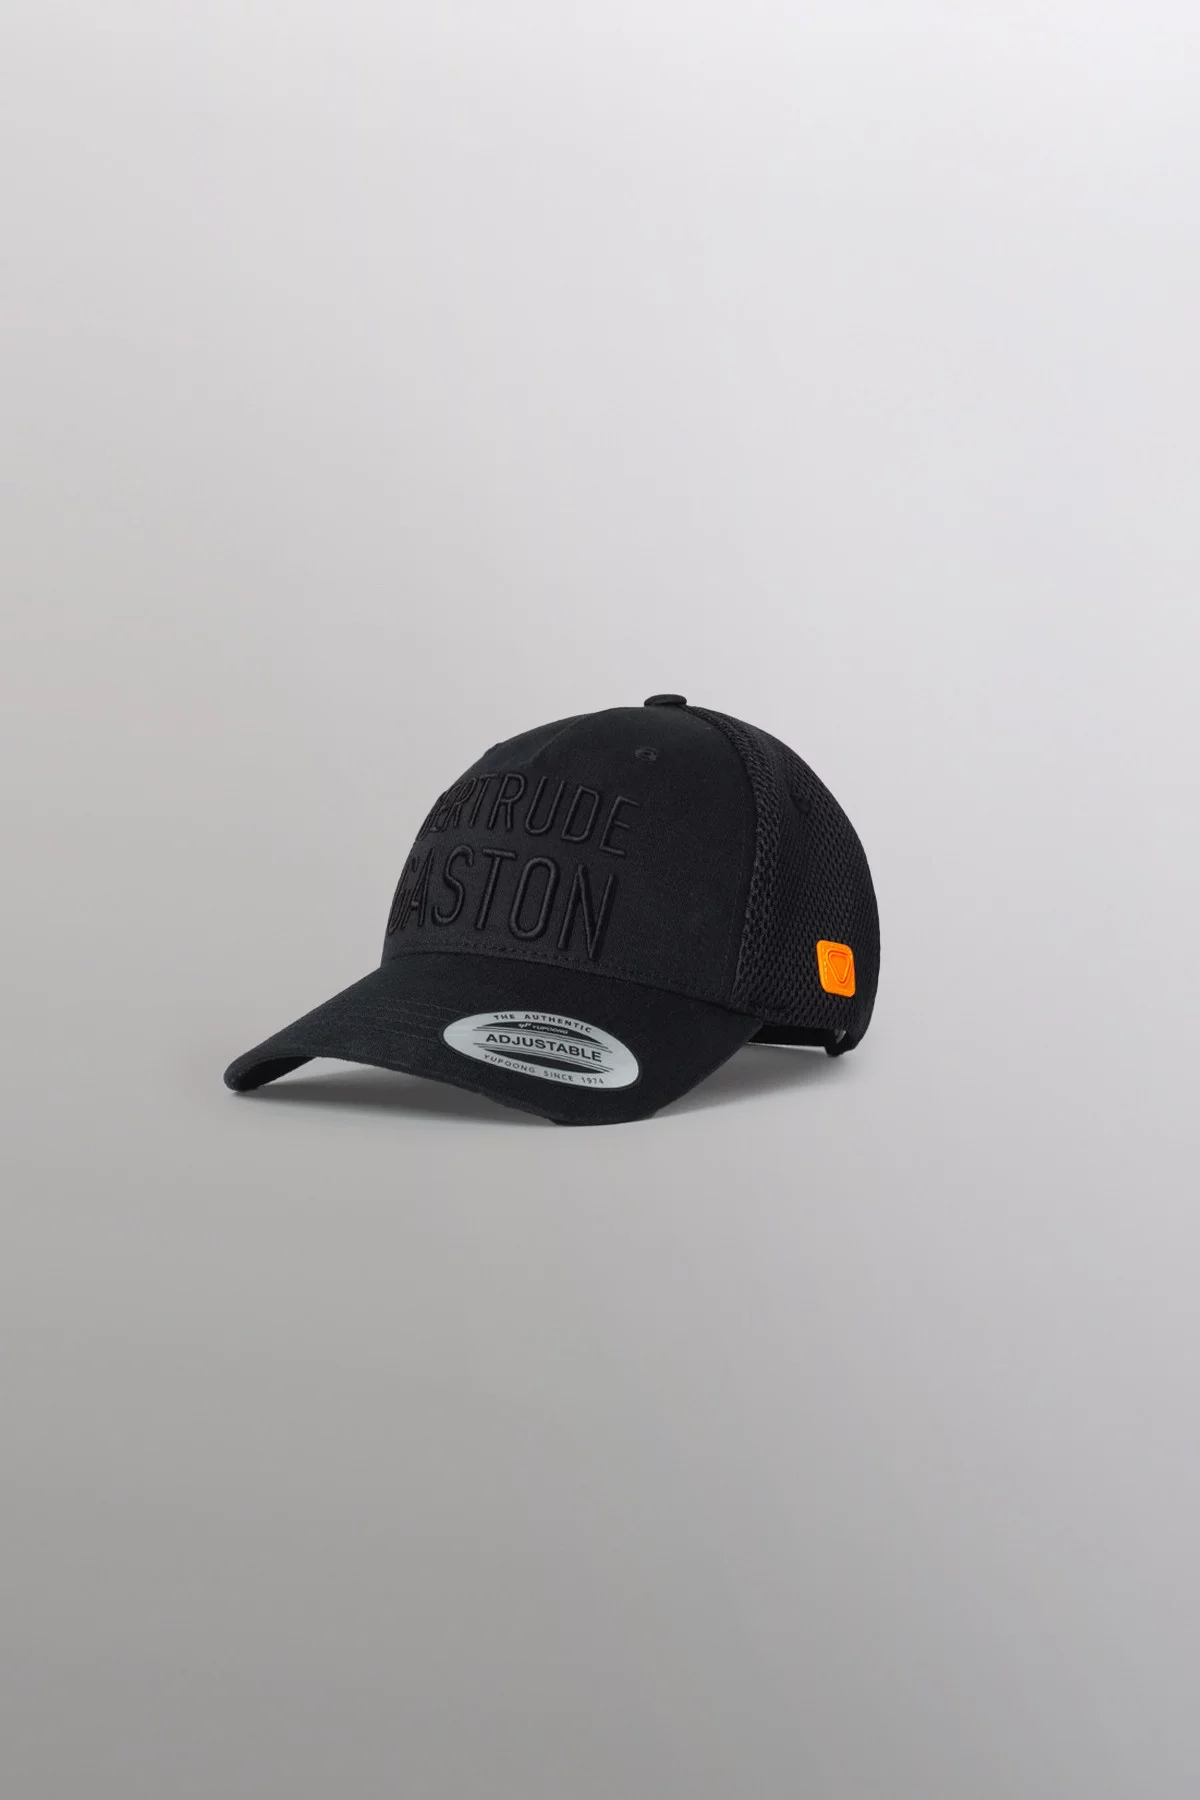 Cap with embroidered Benjo logo on front